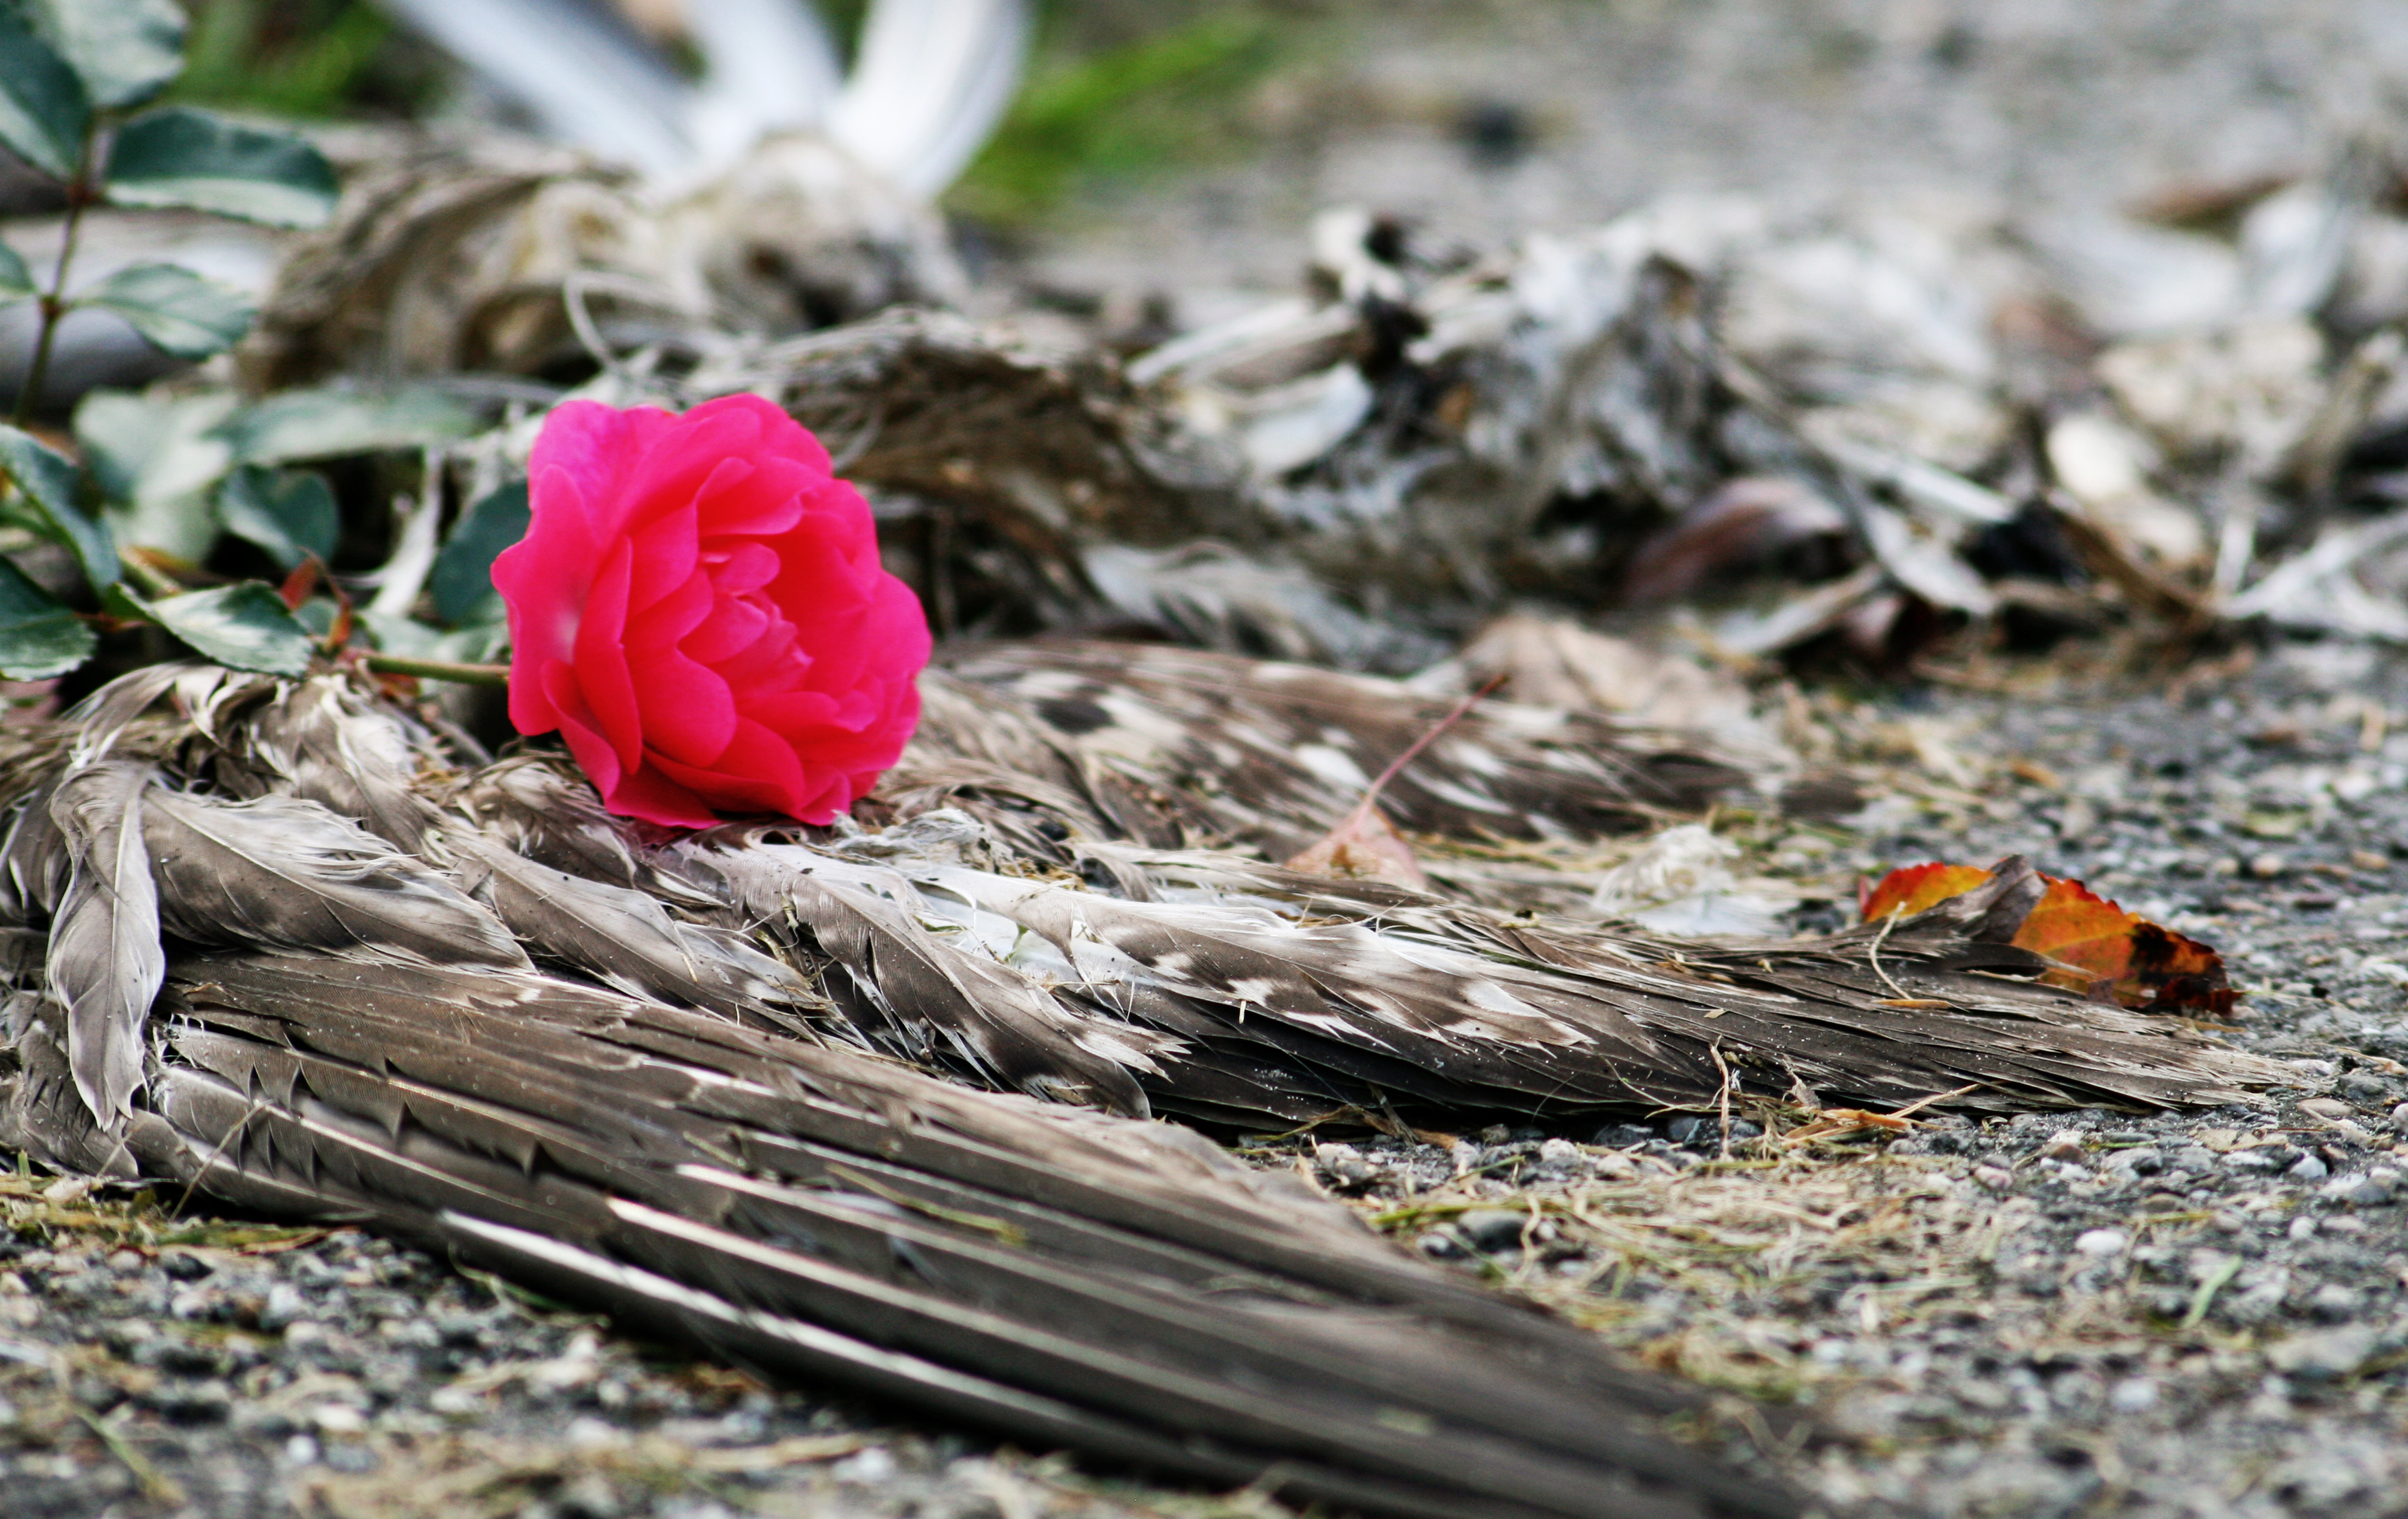 Dead bird and rose photo